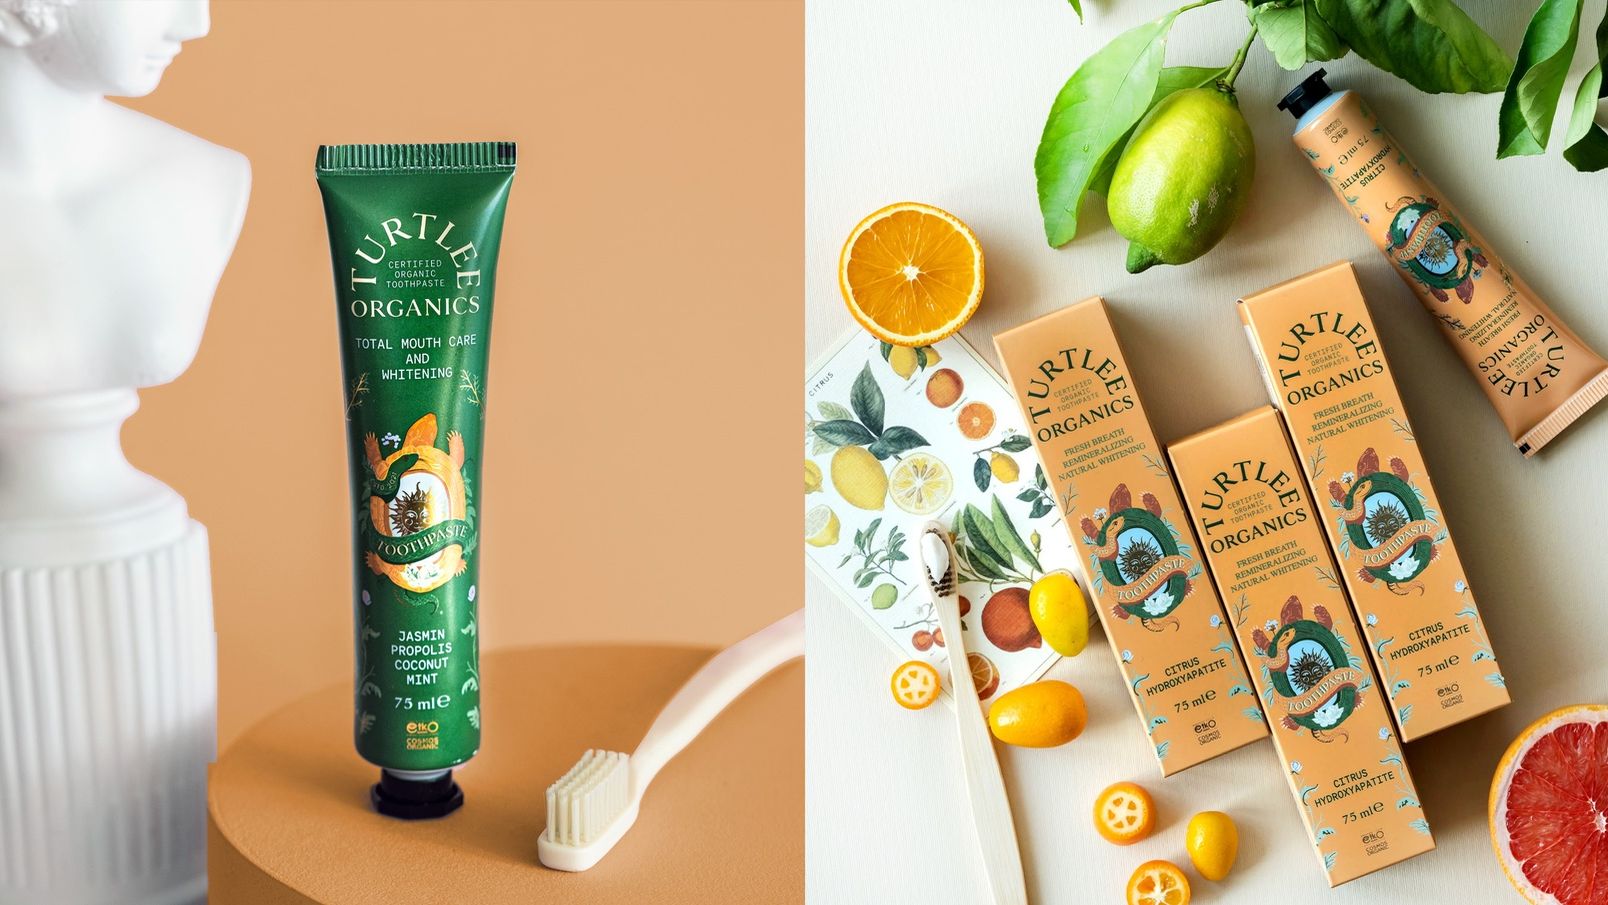 Toothpaste Takes A Whimsical Direction With Turtlee’s Organic Toothpaste